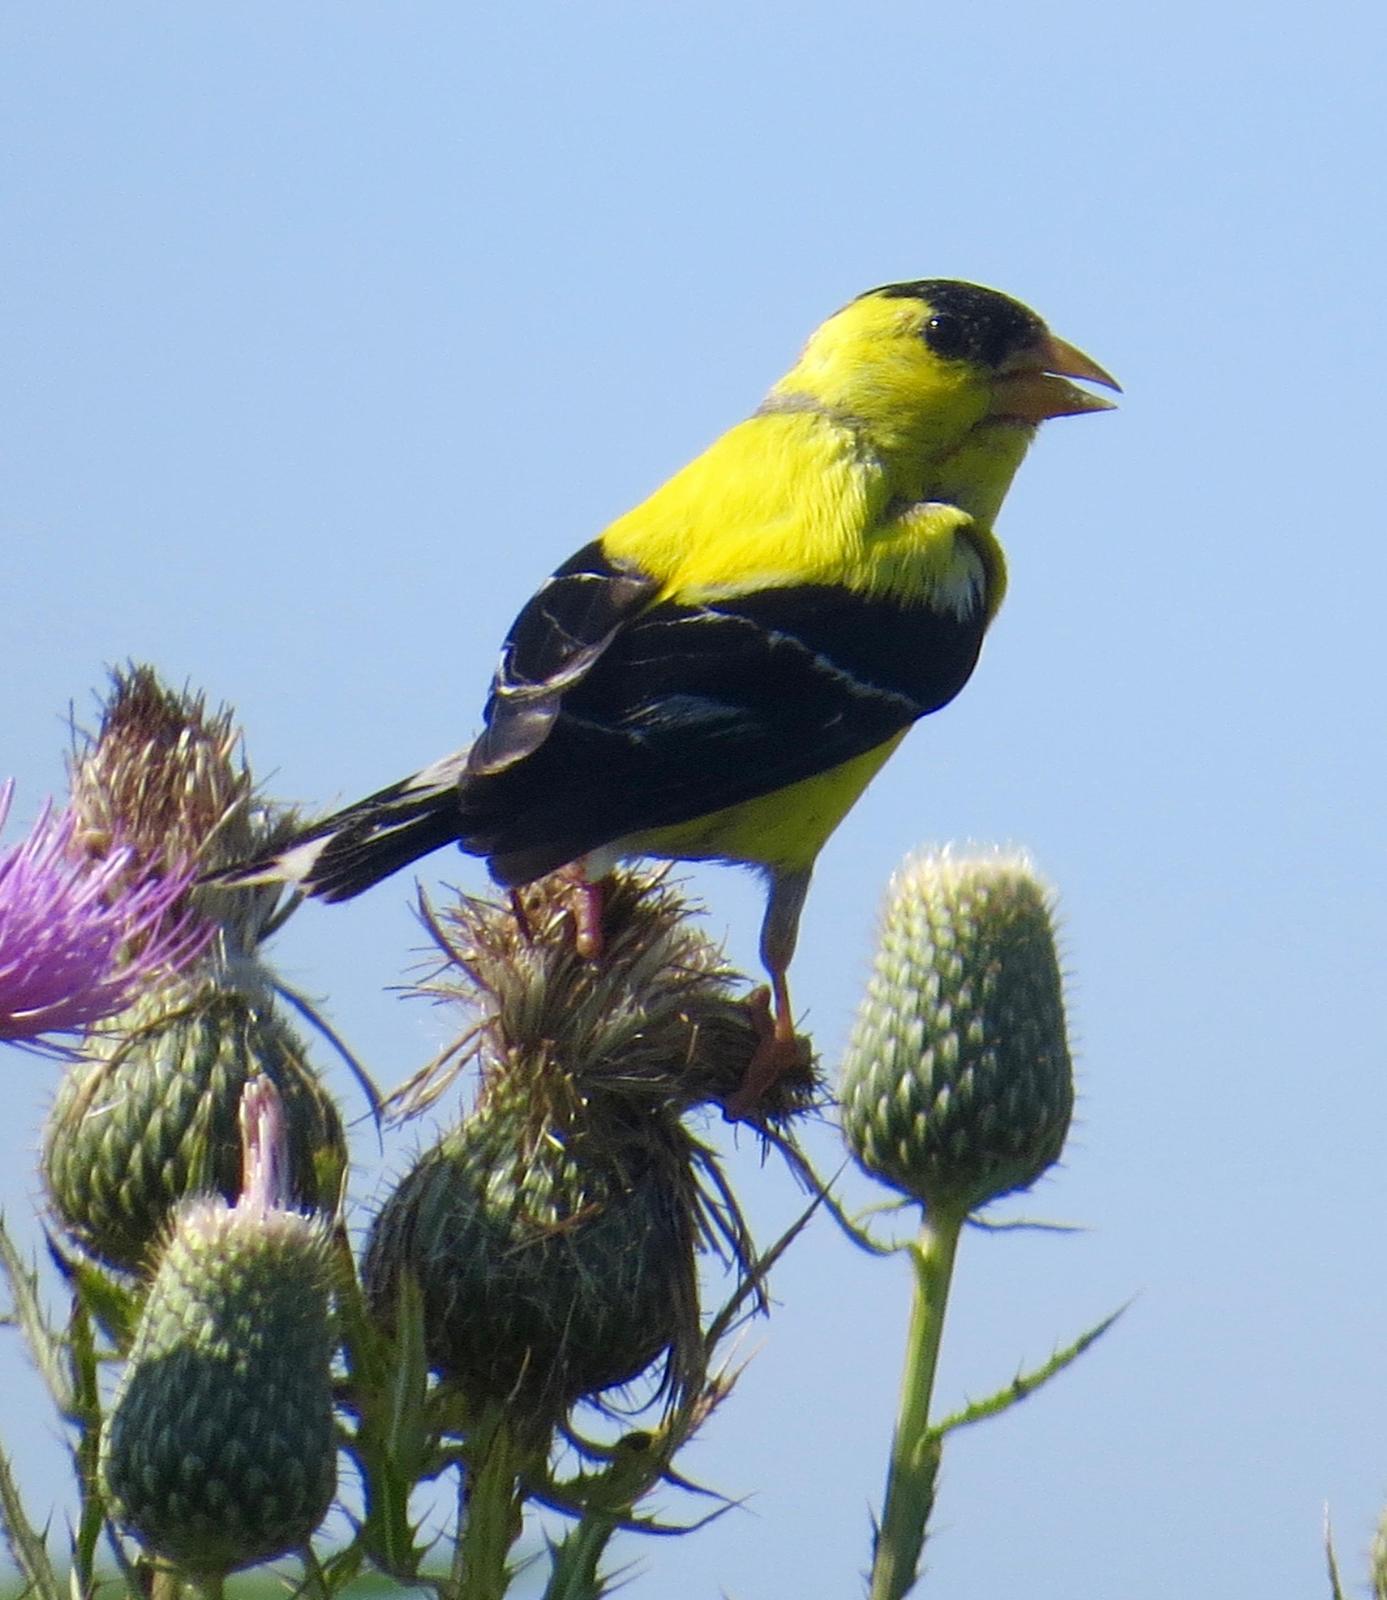 American Goldfinch Photo by Don Glasco